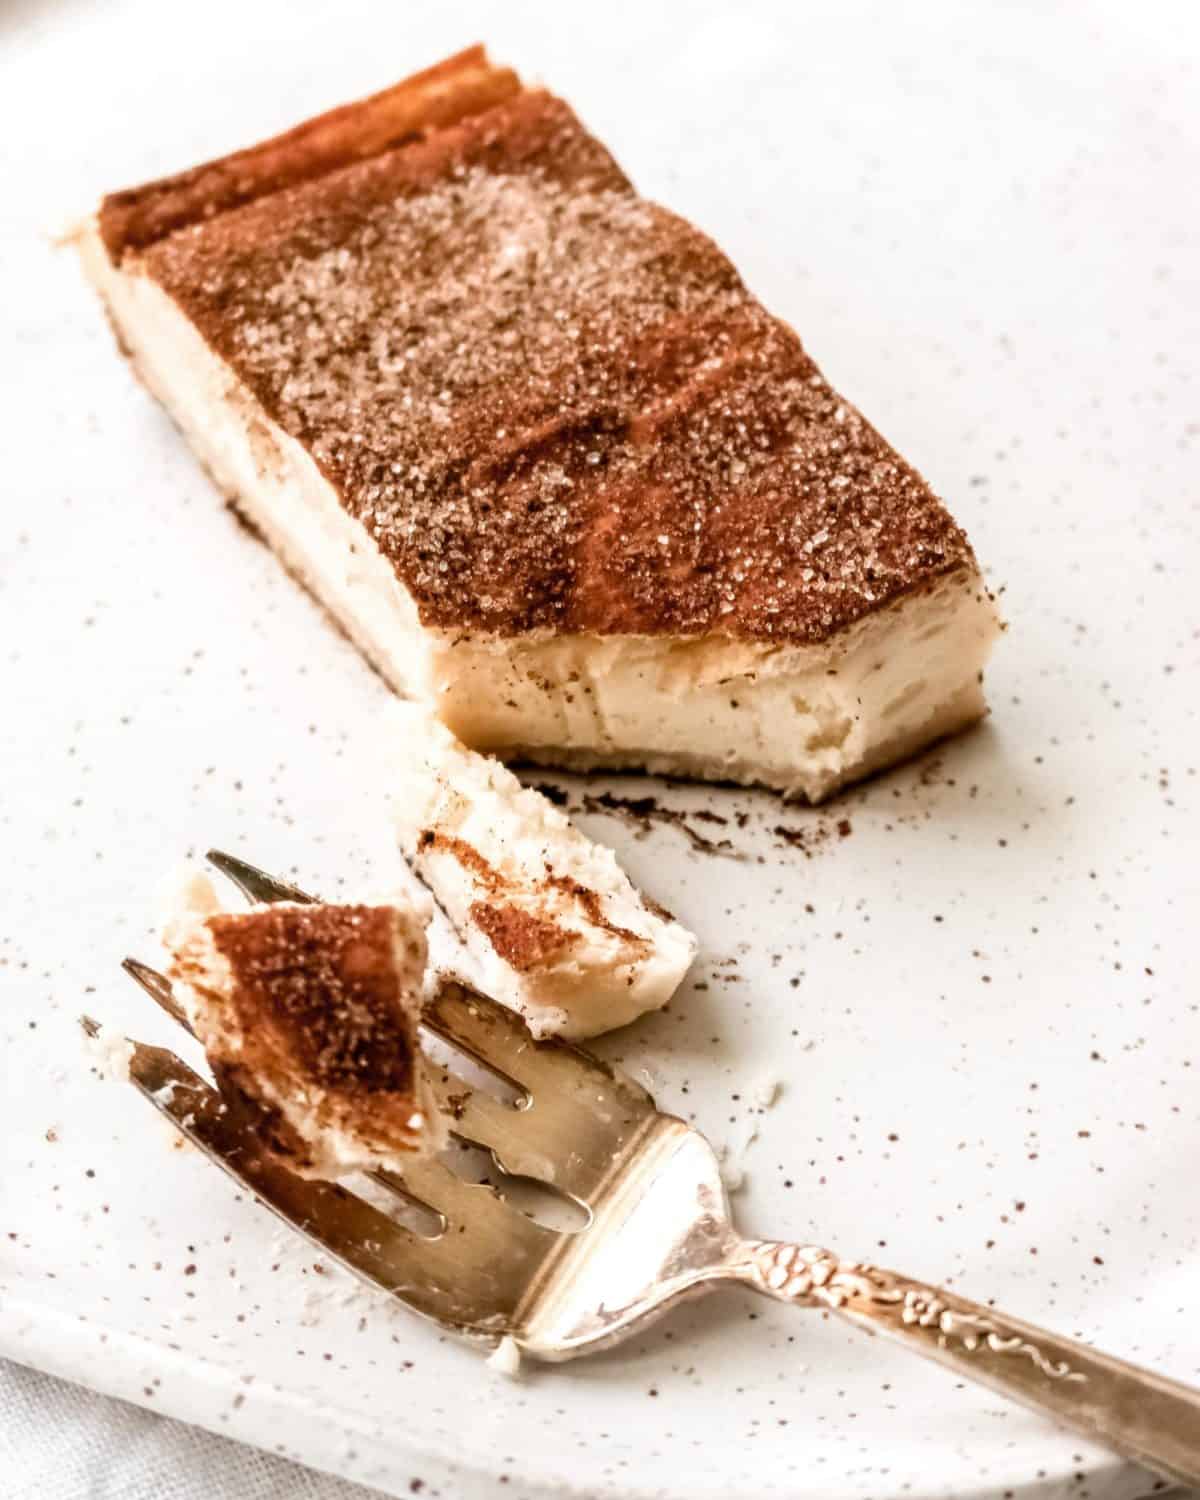 A bite of cheesecake on a plate with a fork.